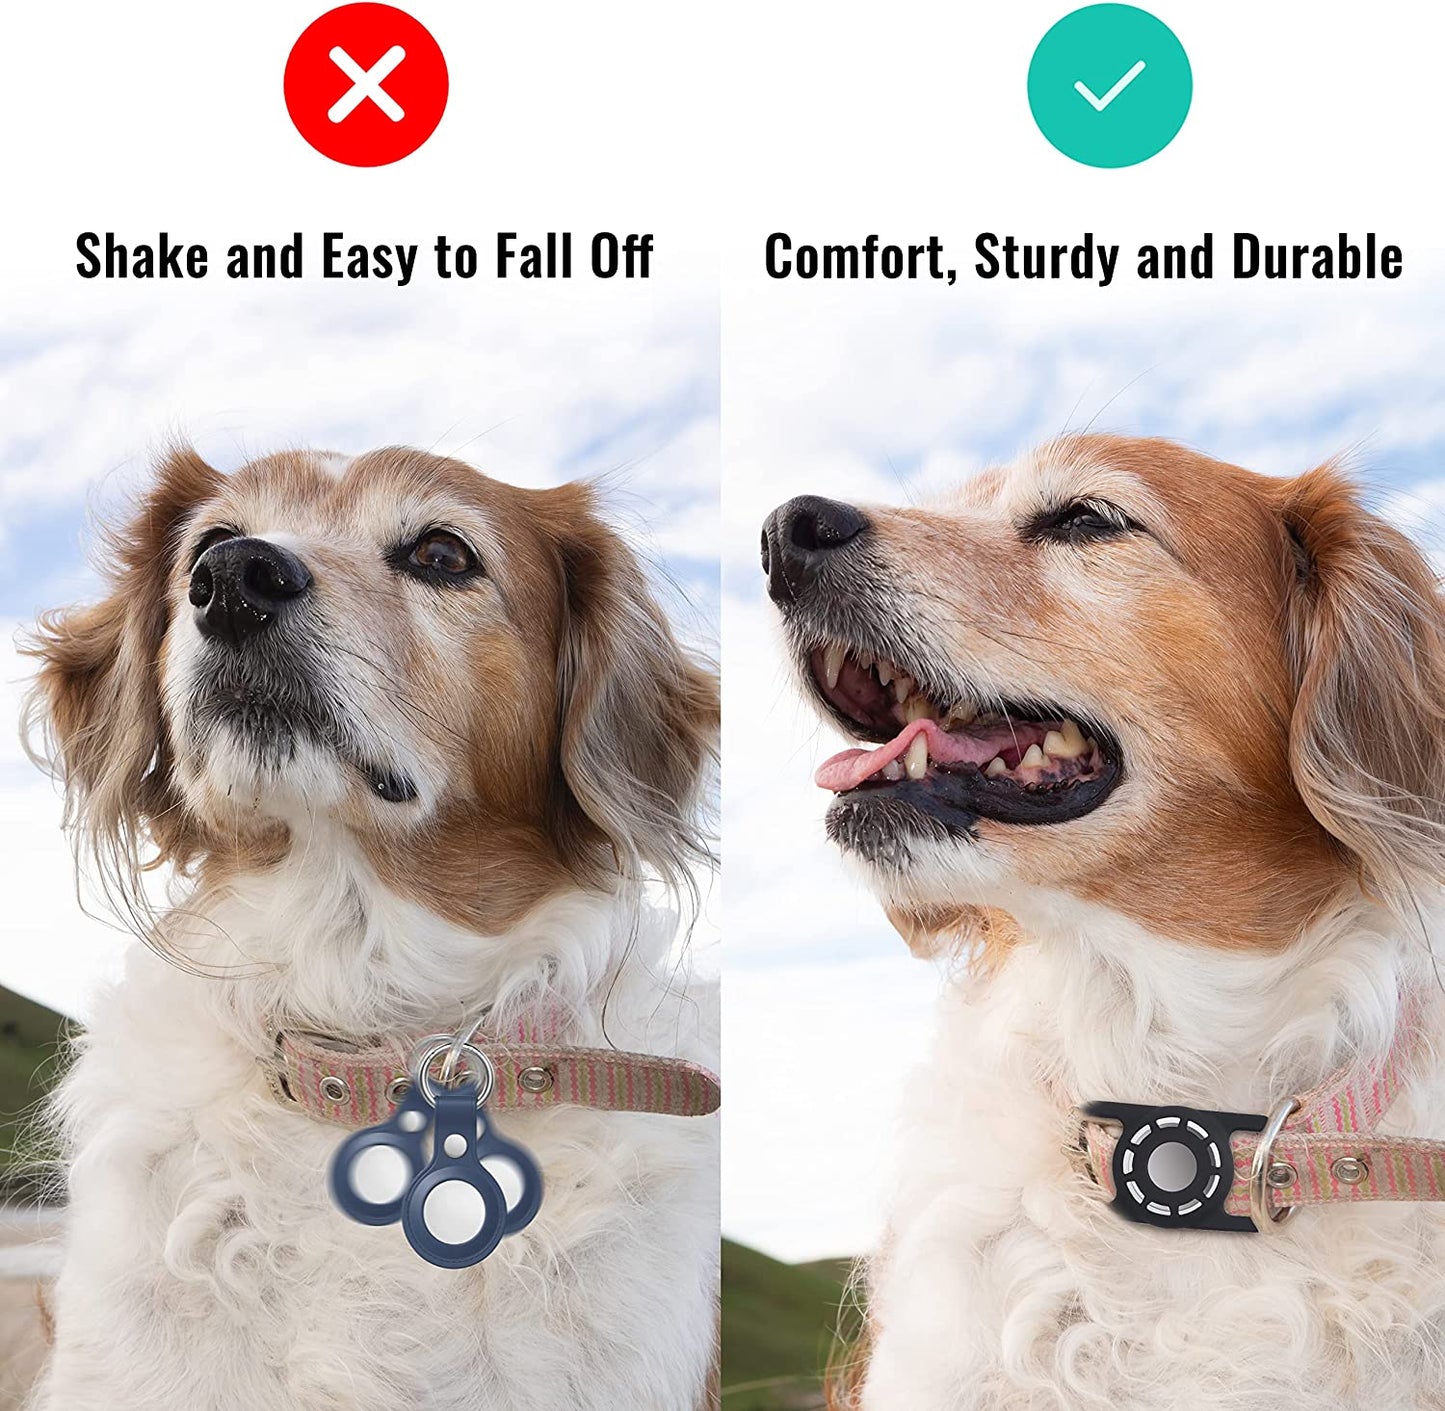 Airtag Dog Collar Holder Fit for Apple Air Tag Dog Collar Size from 0.75 to 1.2 Inch, 2 Pack Airtag Pet Collar Holder and Airbag Dog Collar Protector for Apple Airtag